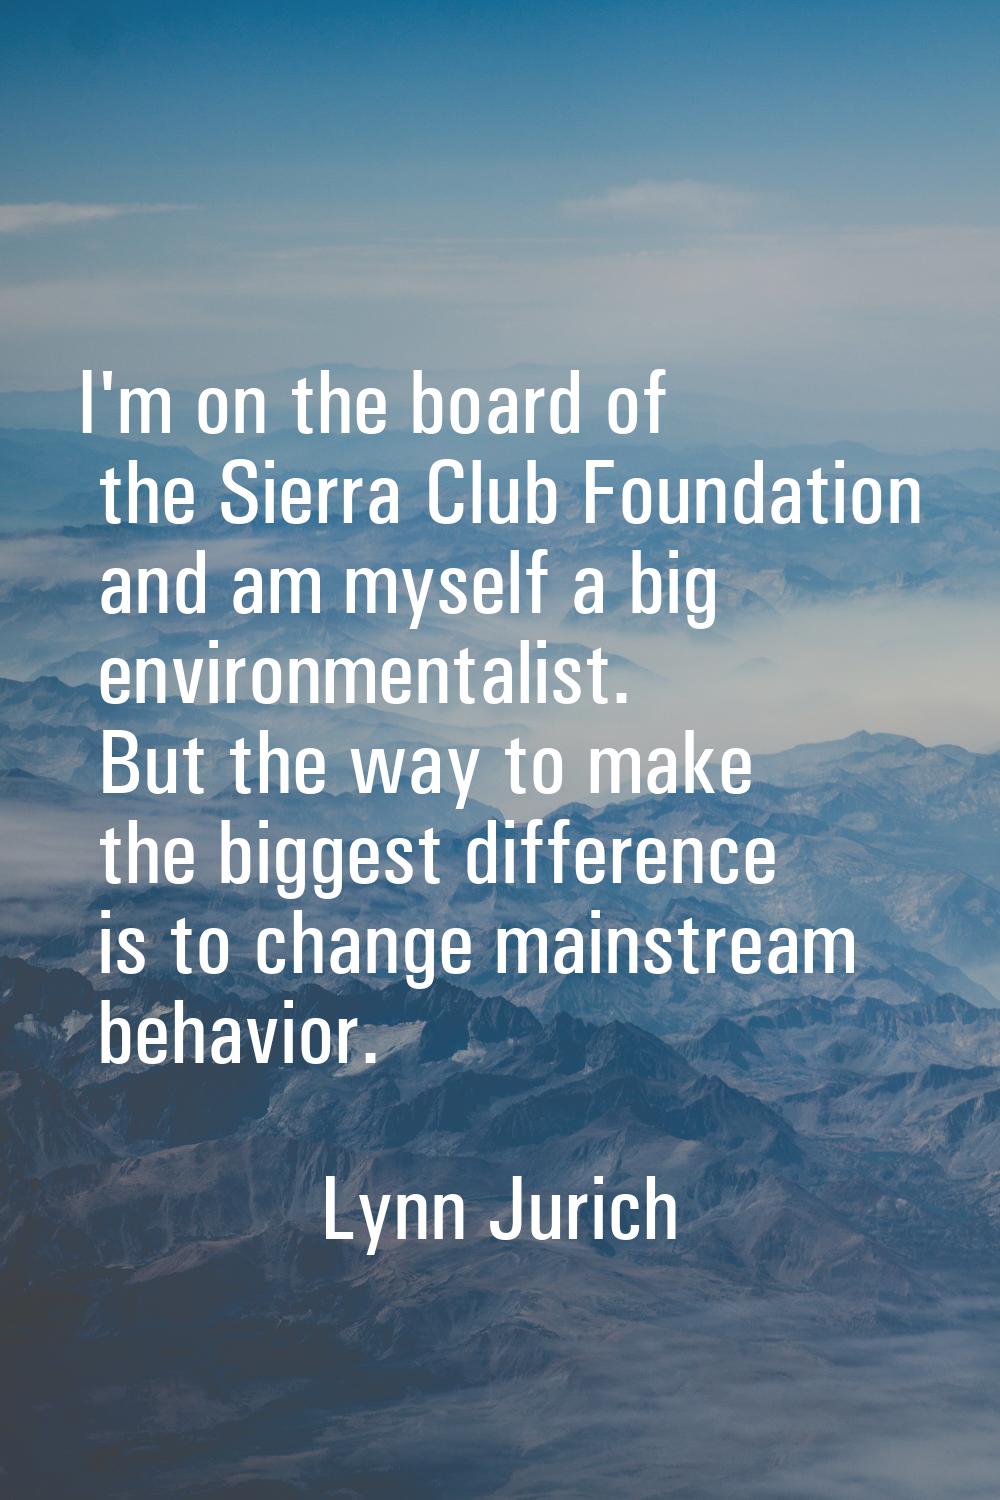 I'm on the board of the Sierra Club Foundation and am myself a big environmentalist. But the way to